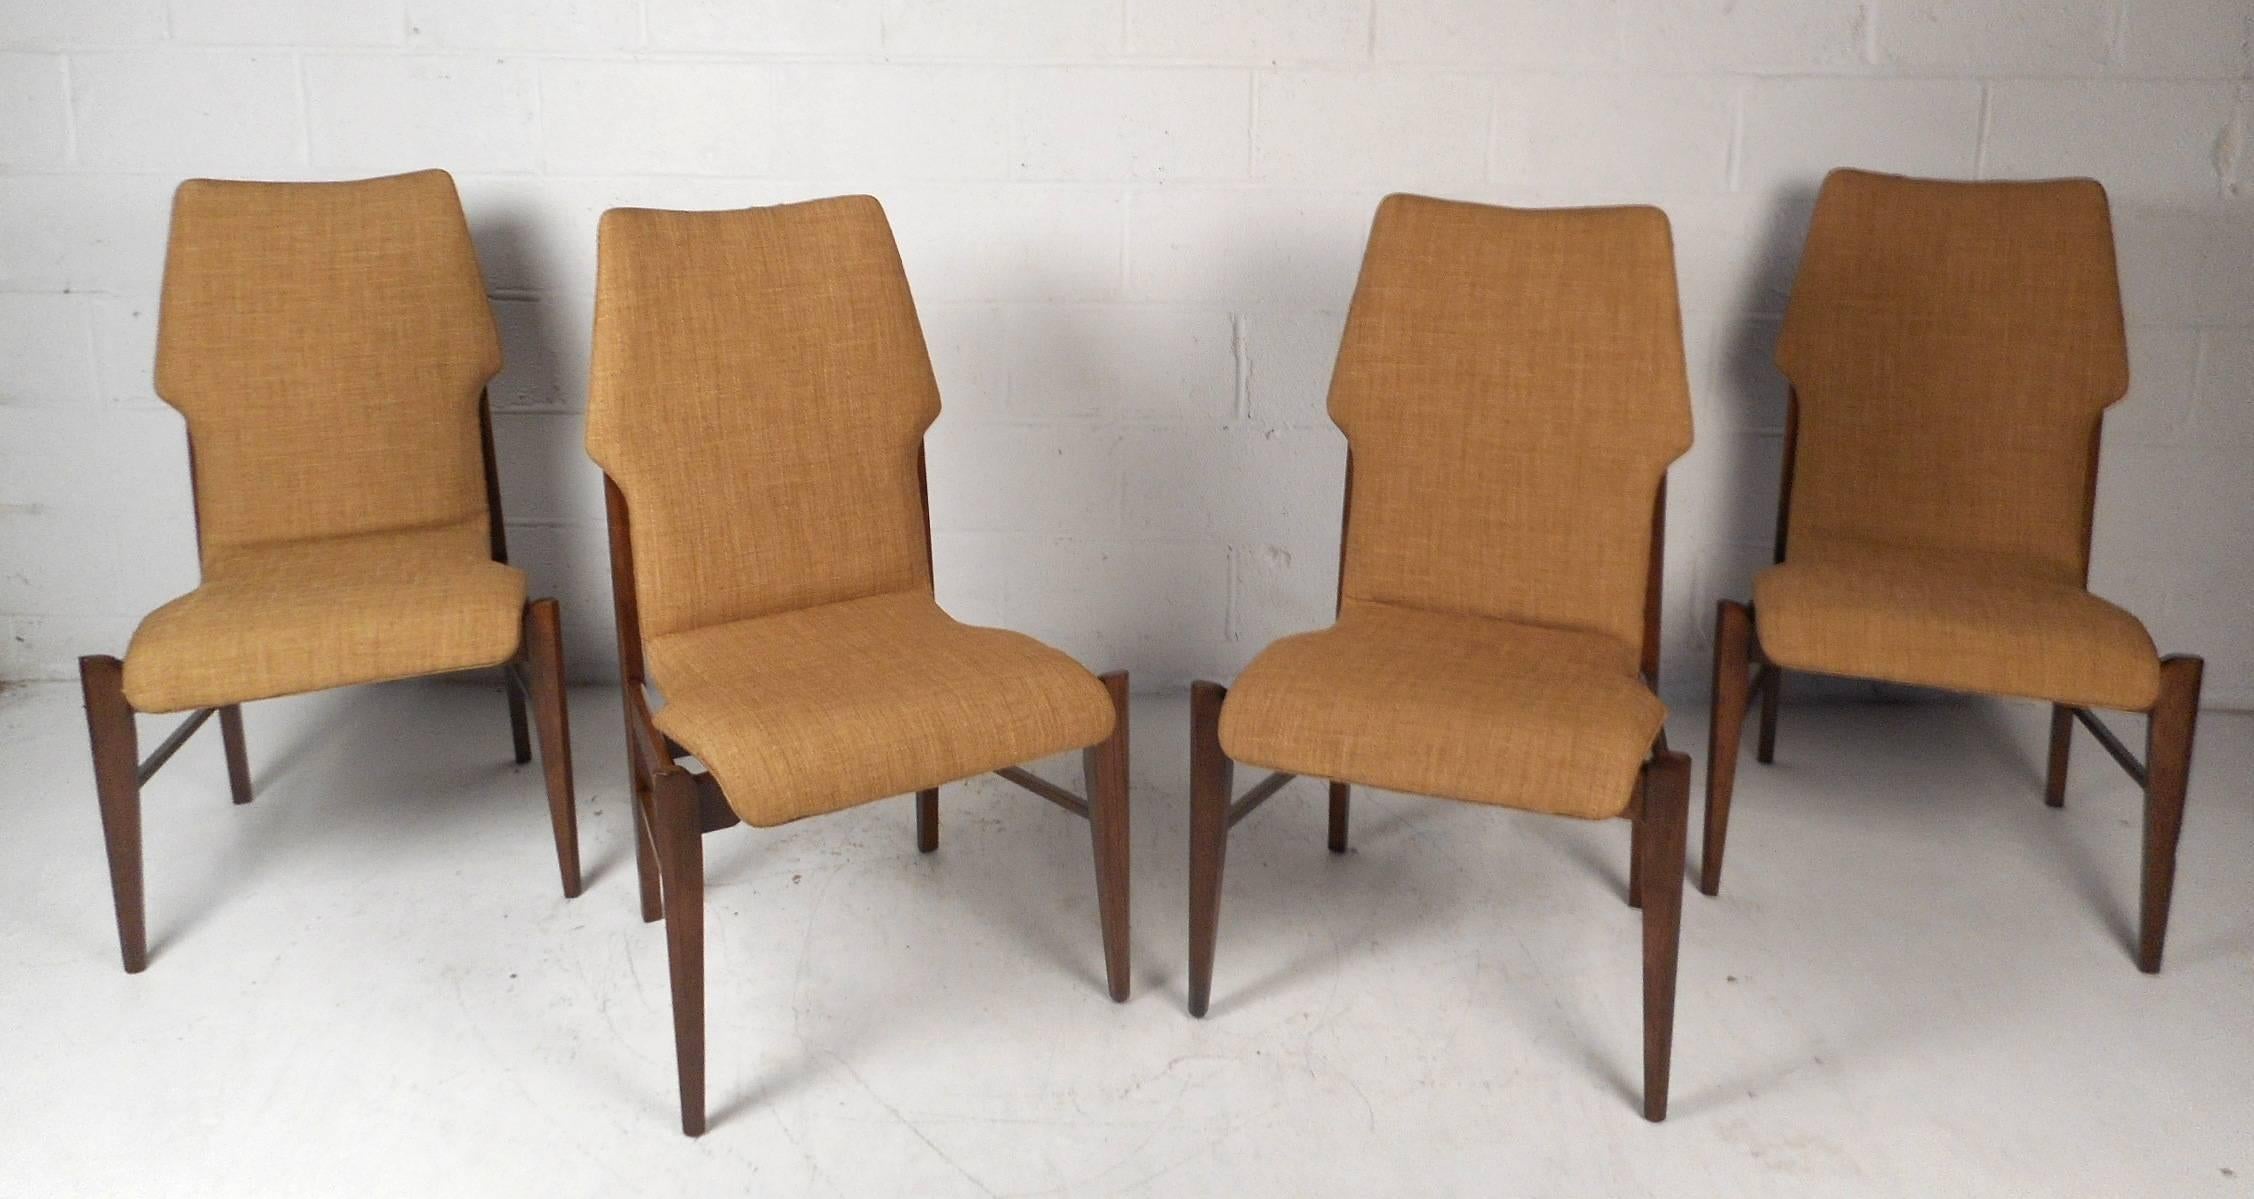 This gorgeous vintage modern set of four dining chairs feature unique walnut backs with upholstered seating. Sleek design with unique tapered legs and an unusually shaped back rest. Quality craftsmanship with elegant dark walnut wood grain and soft